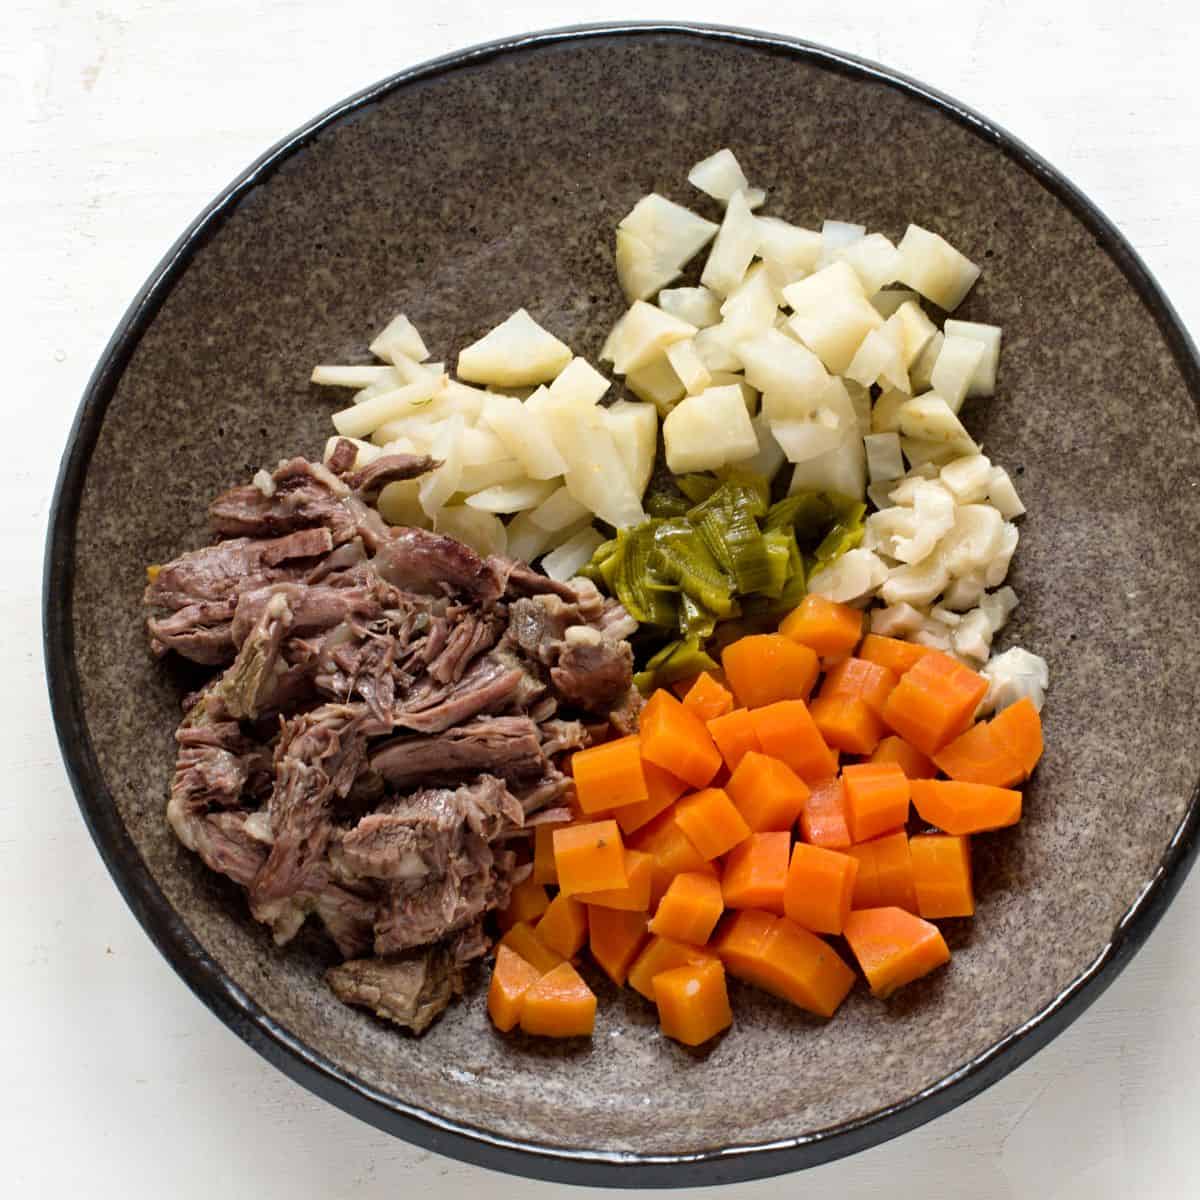 Vegetables cut in cubes, cooked beef on a brown plate.